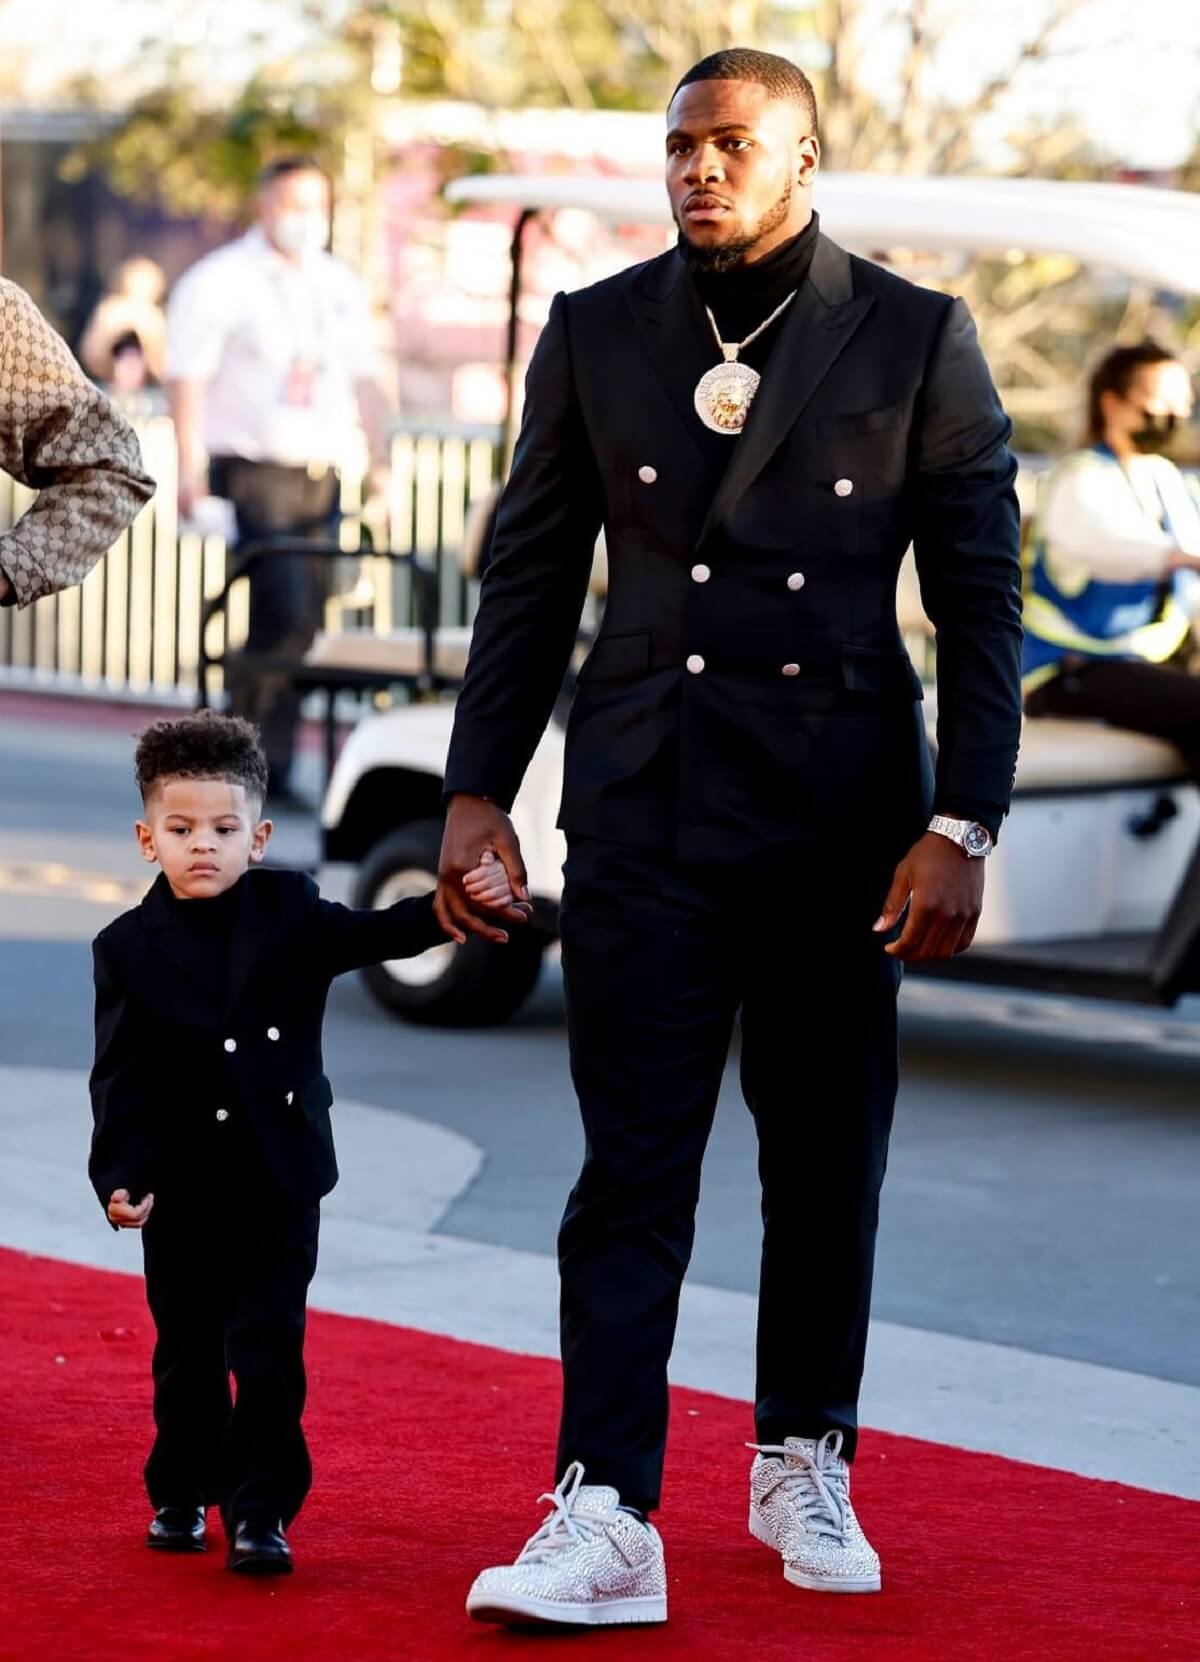 Micah Parsons arrives with his son, Malcolm, for the NFL Honors show